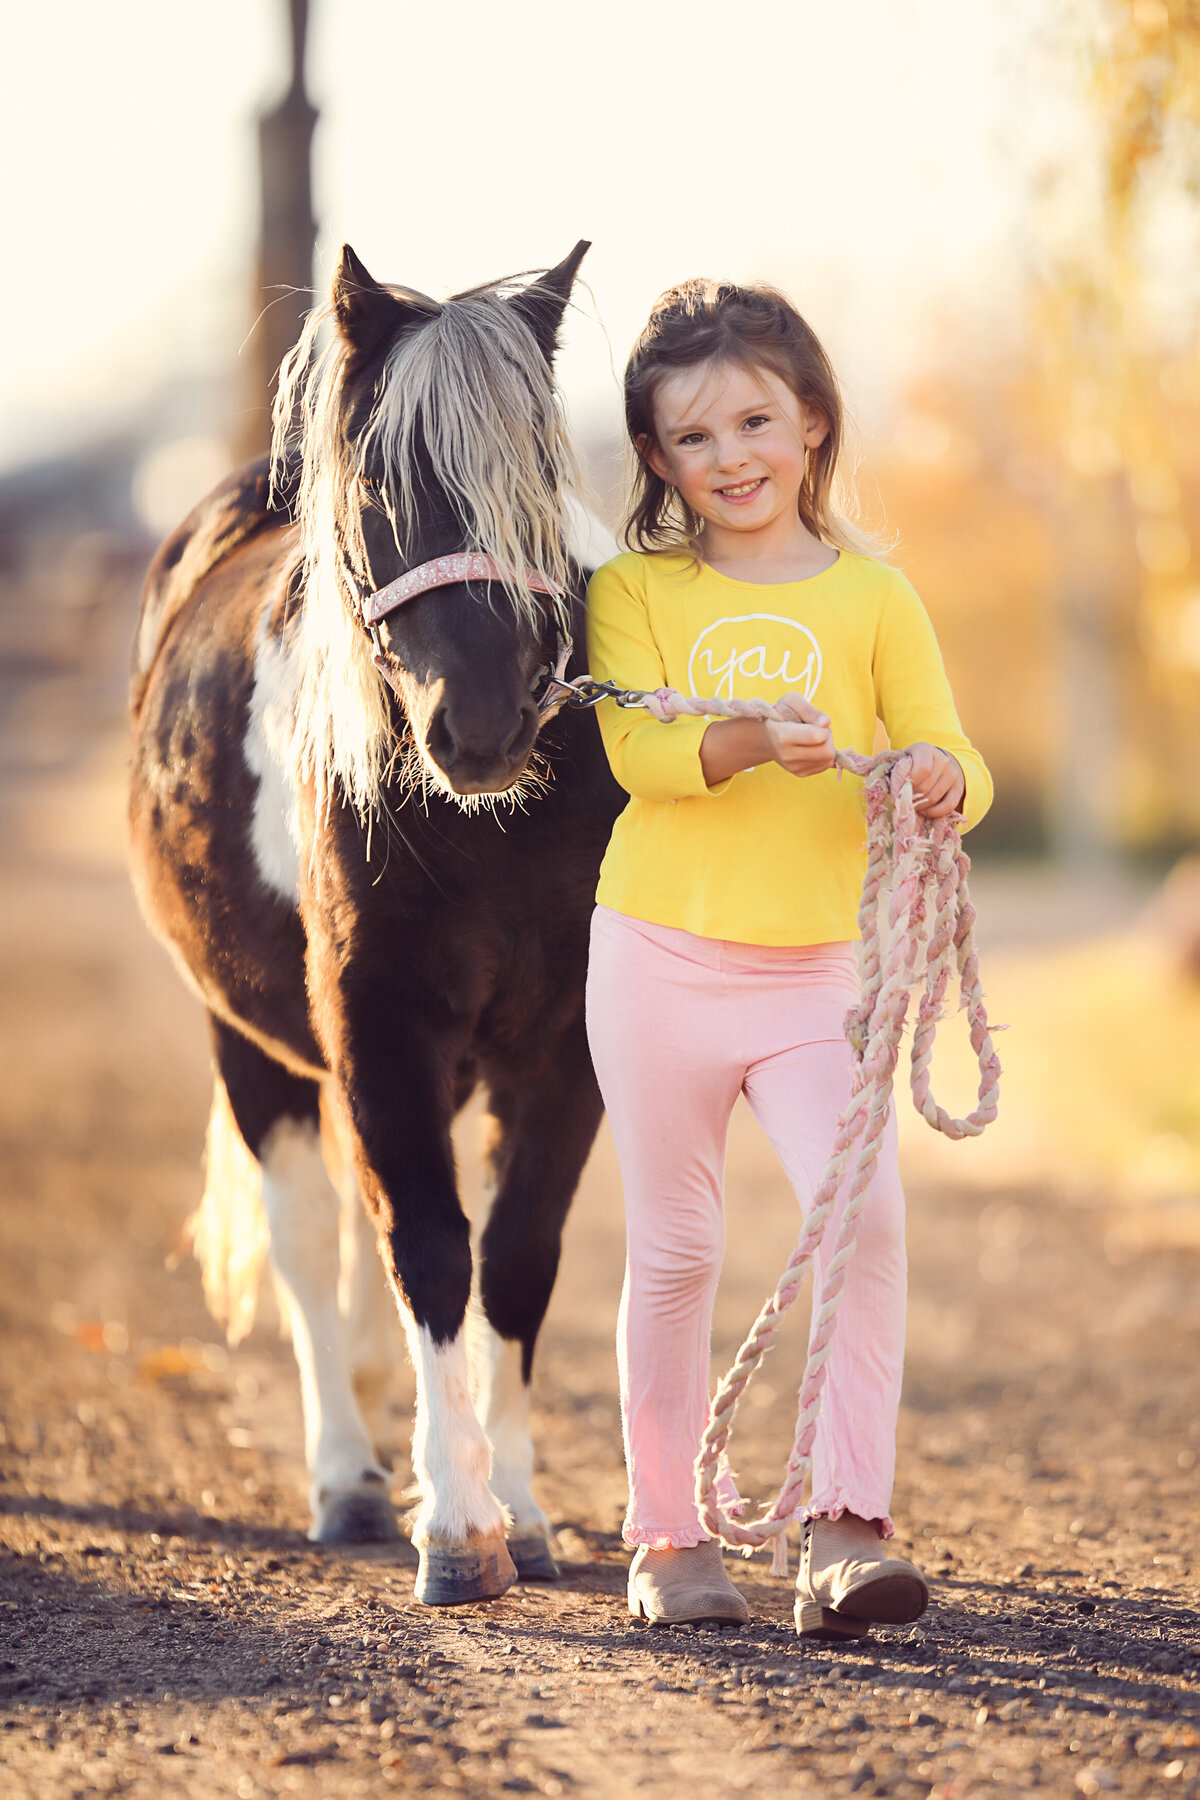 Yvonne-Min-Family-Photos-outside-natural-light-trees-sunset-photography-pets-denver-thornton-broomfield-kids-children-girl-yellow-walk-walking-portraits-session-westminster-north-colorado-flowers-canon-images-camera-erie-farm-donkey-foal-11